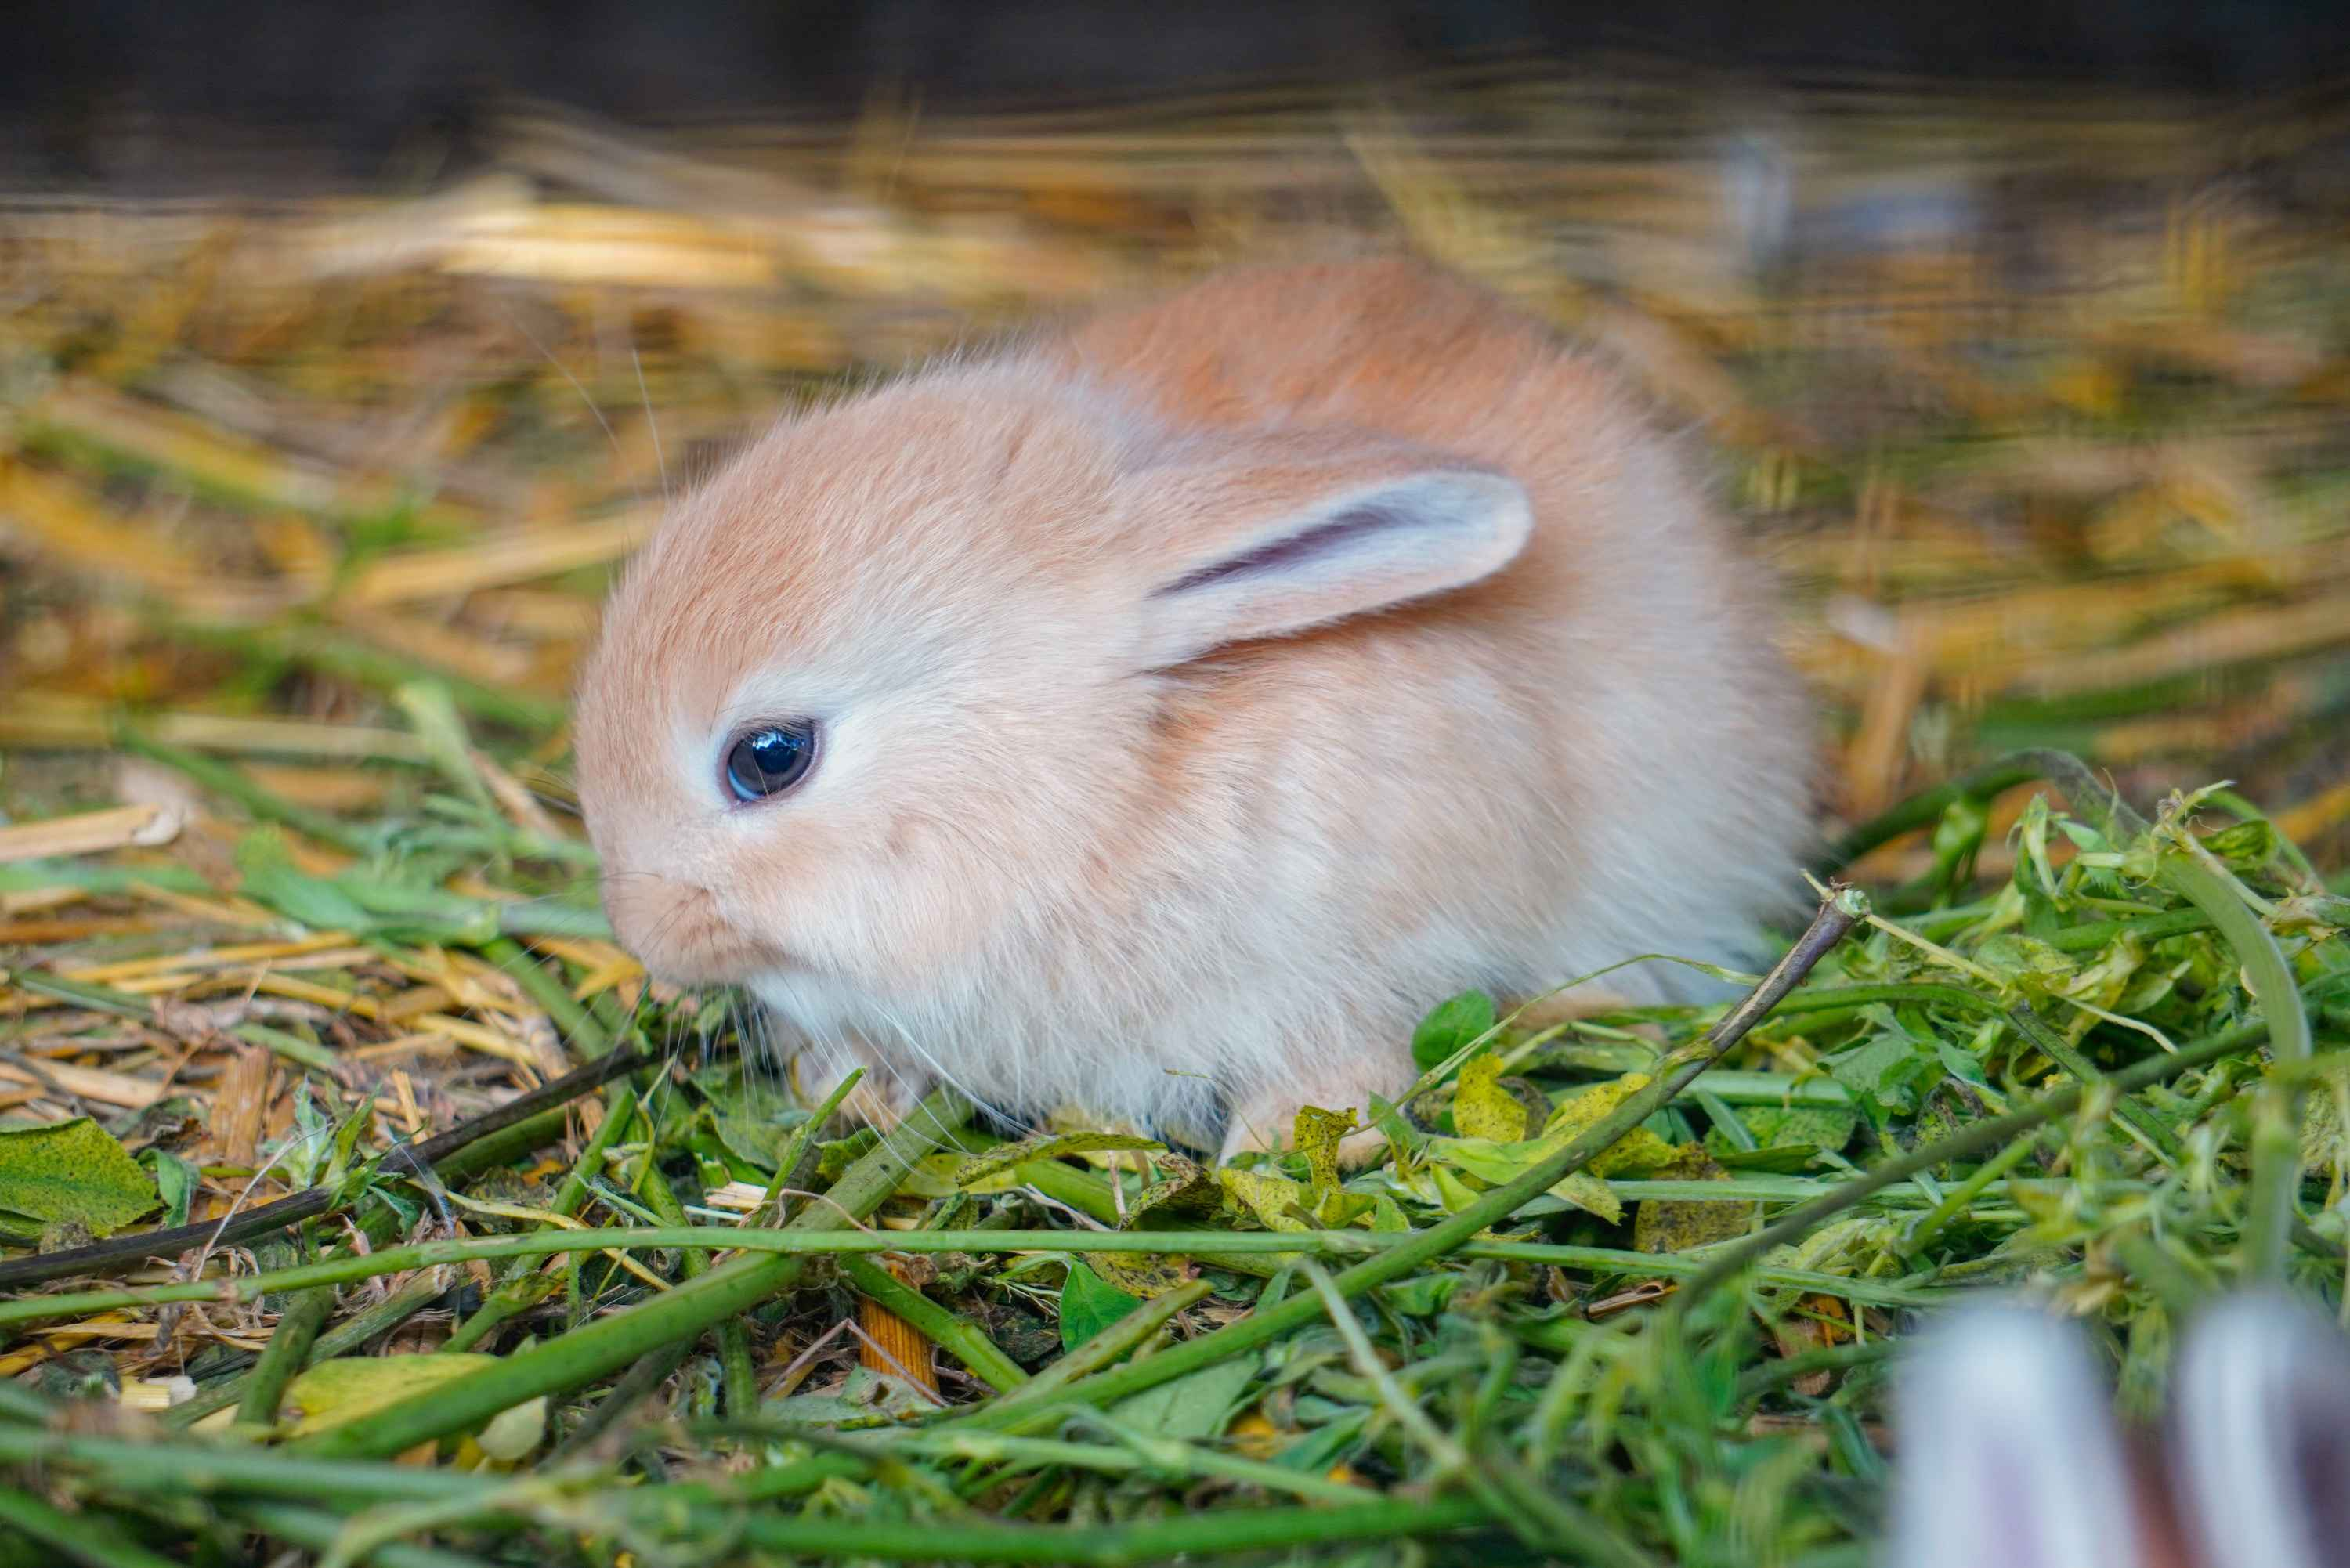 Rabbit Playtime: Exploring the Question - Can Rabbits Have Playmates?